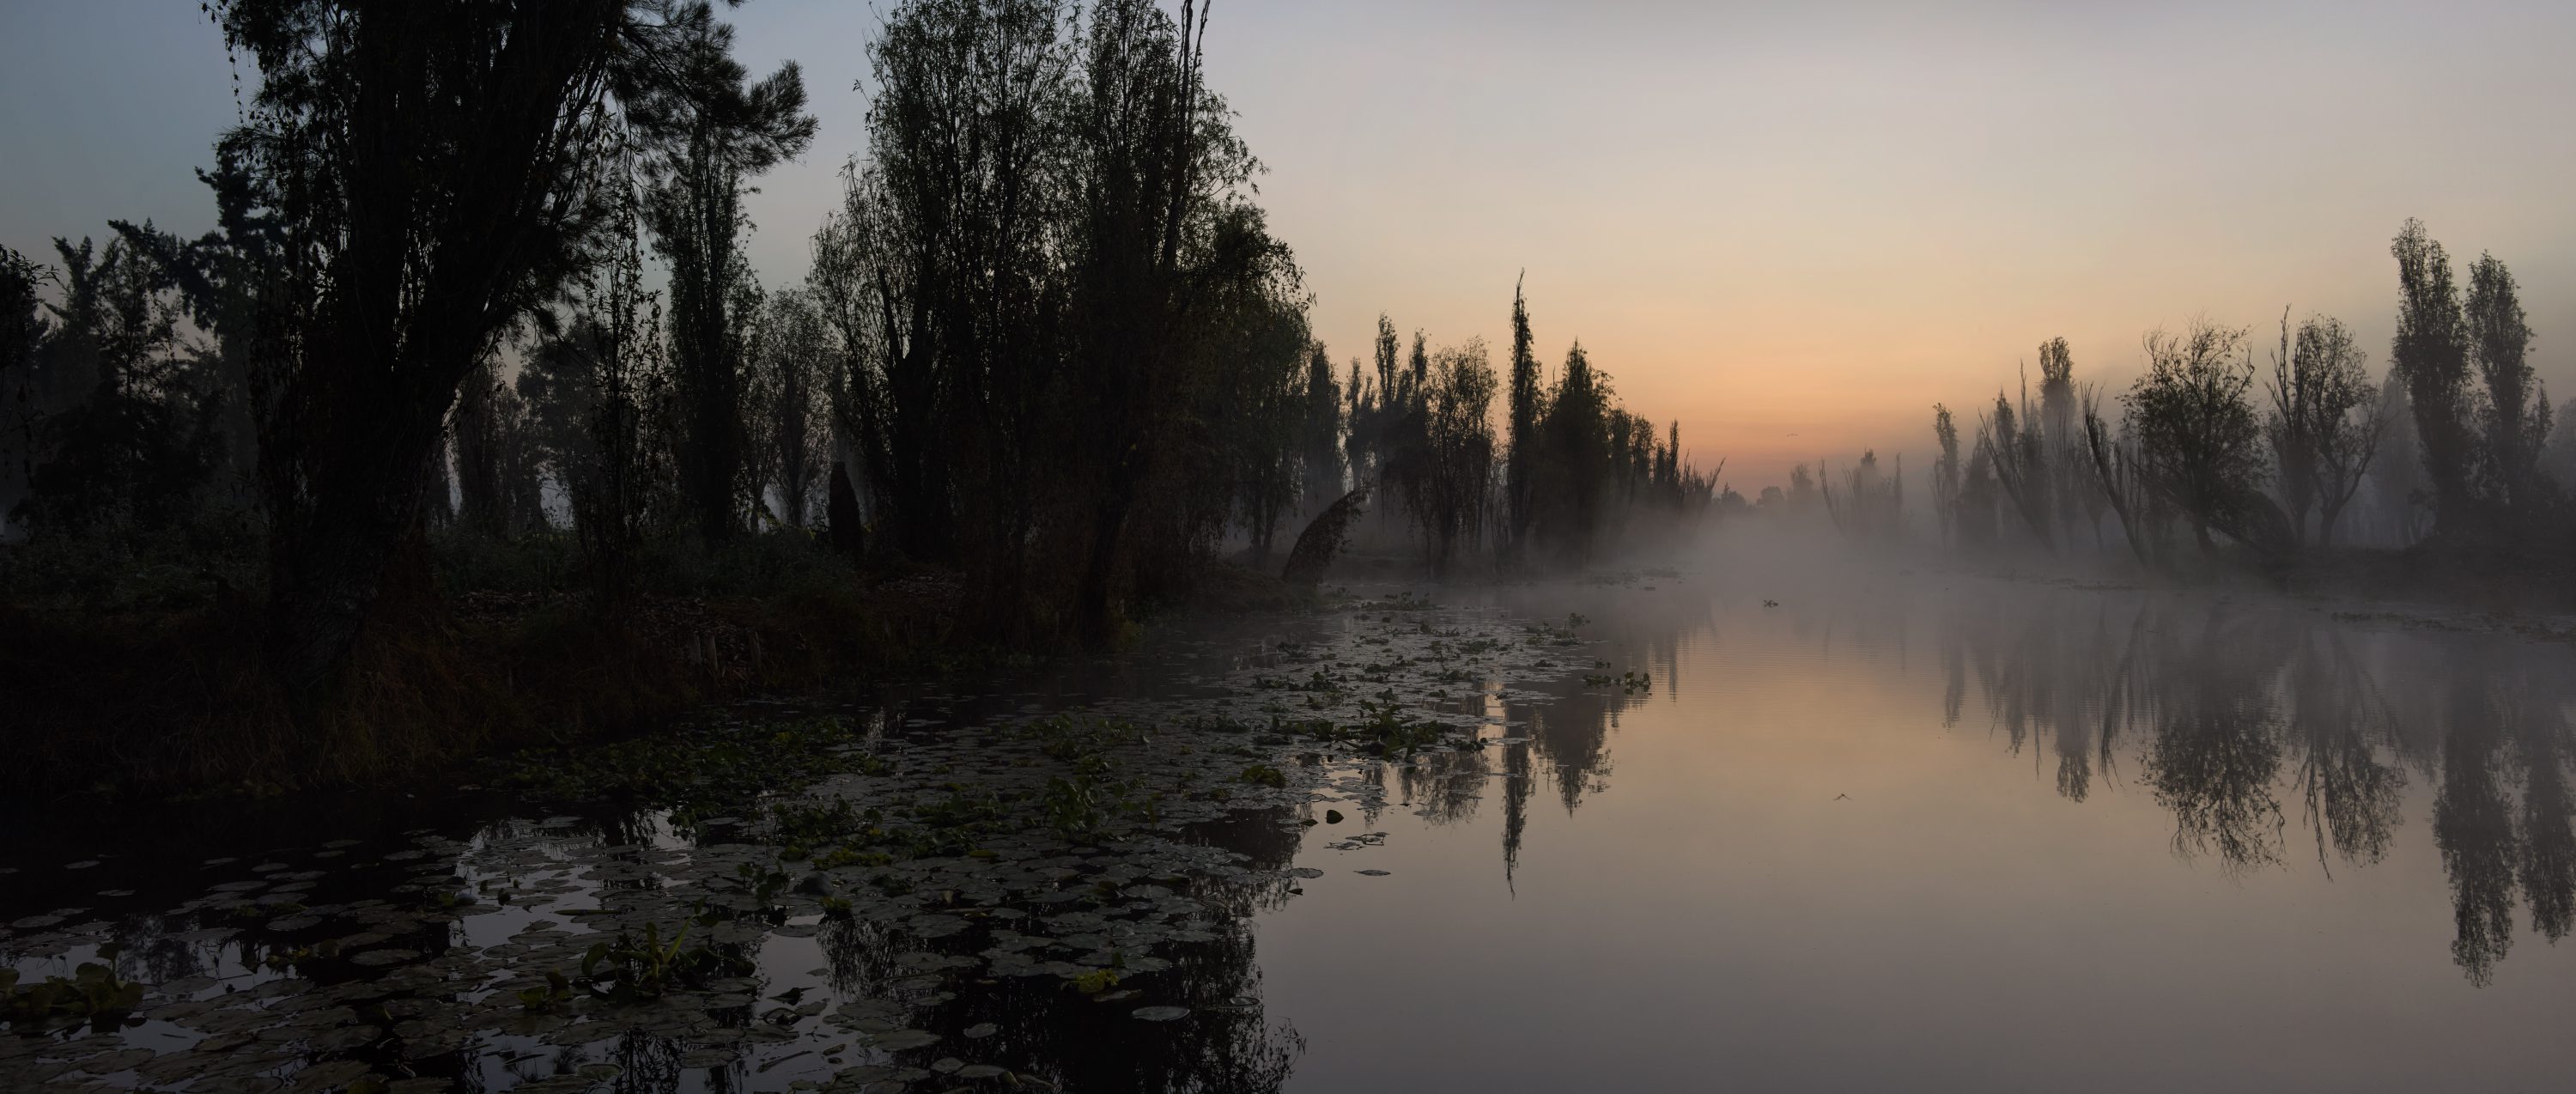 landscape early morning visiting the Chinampas Mexico-city © by photographer Ruud Sies